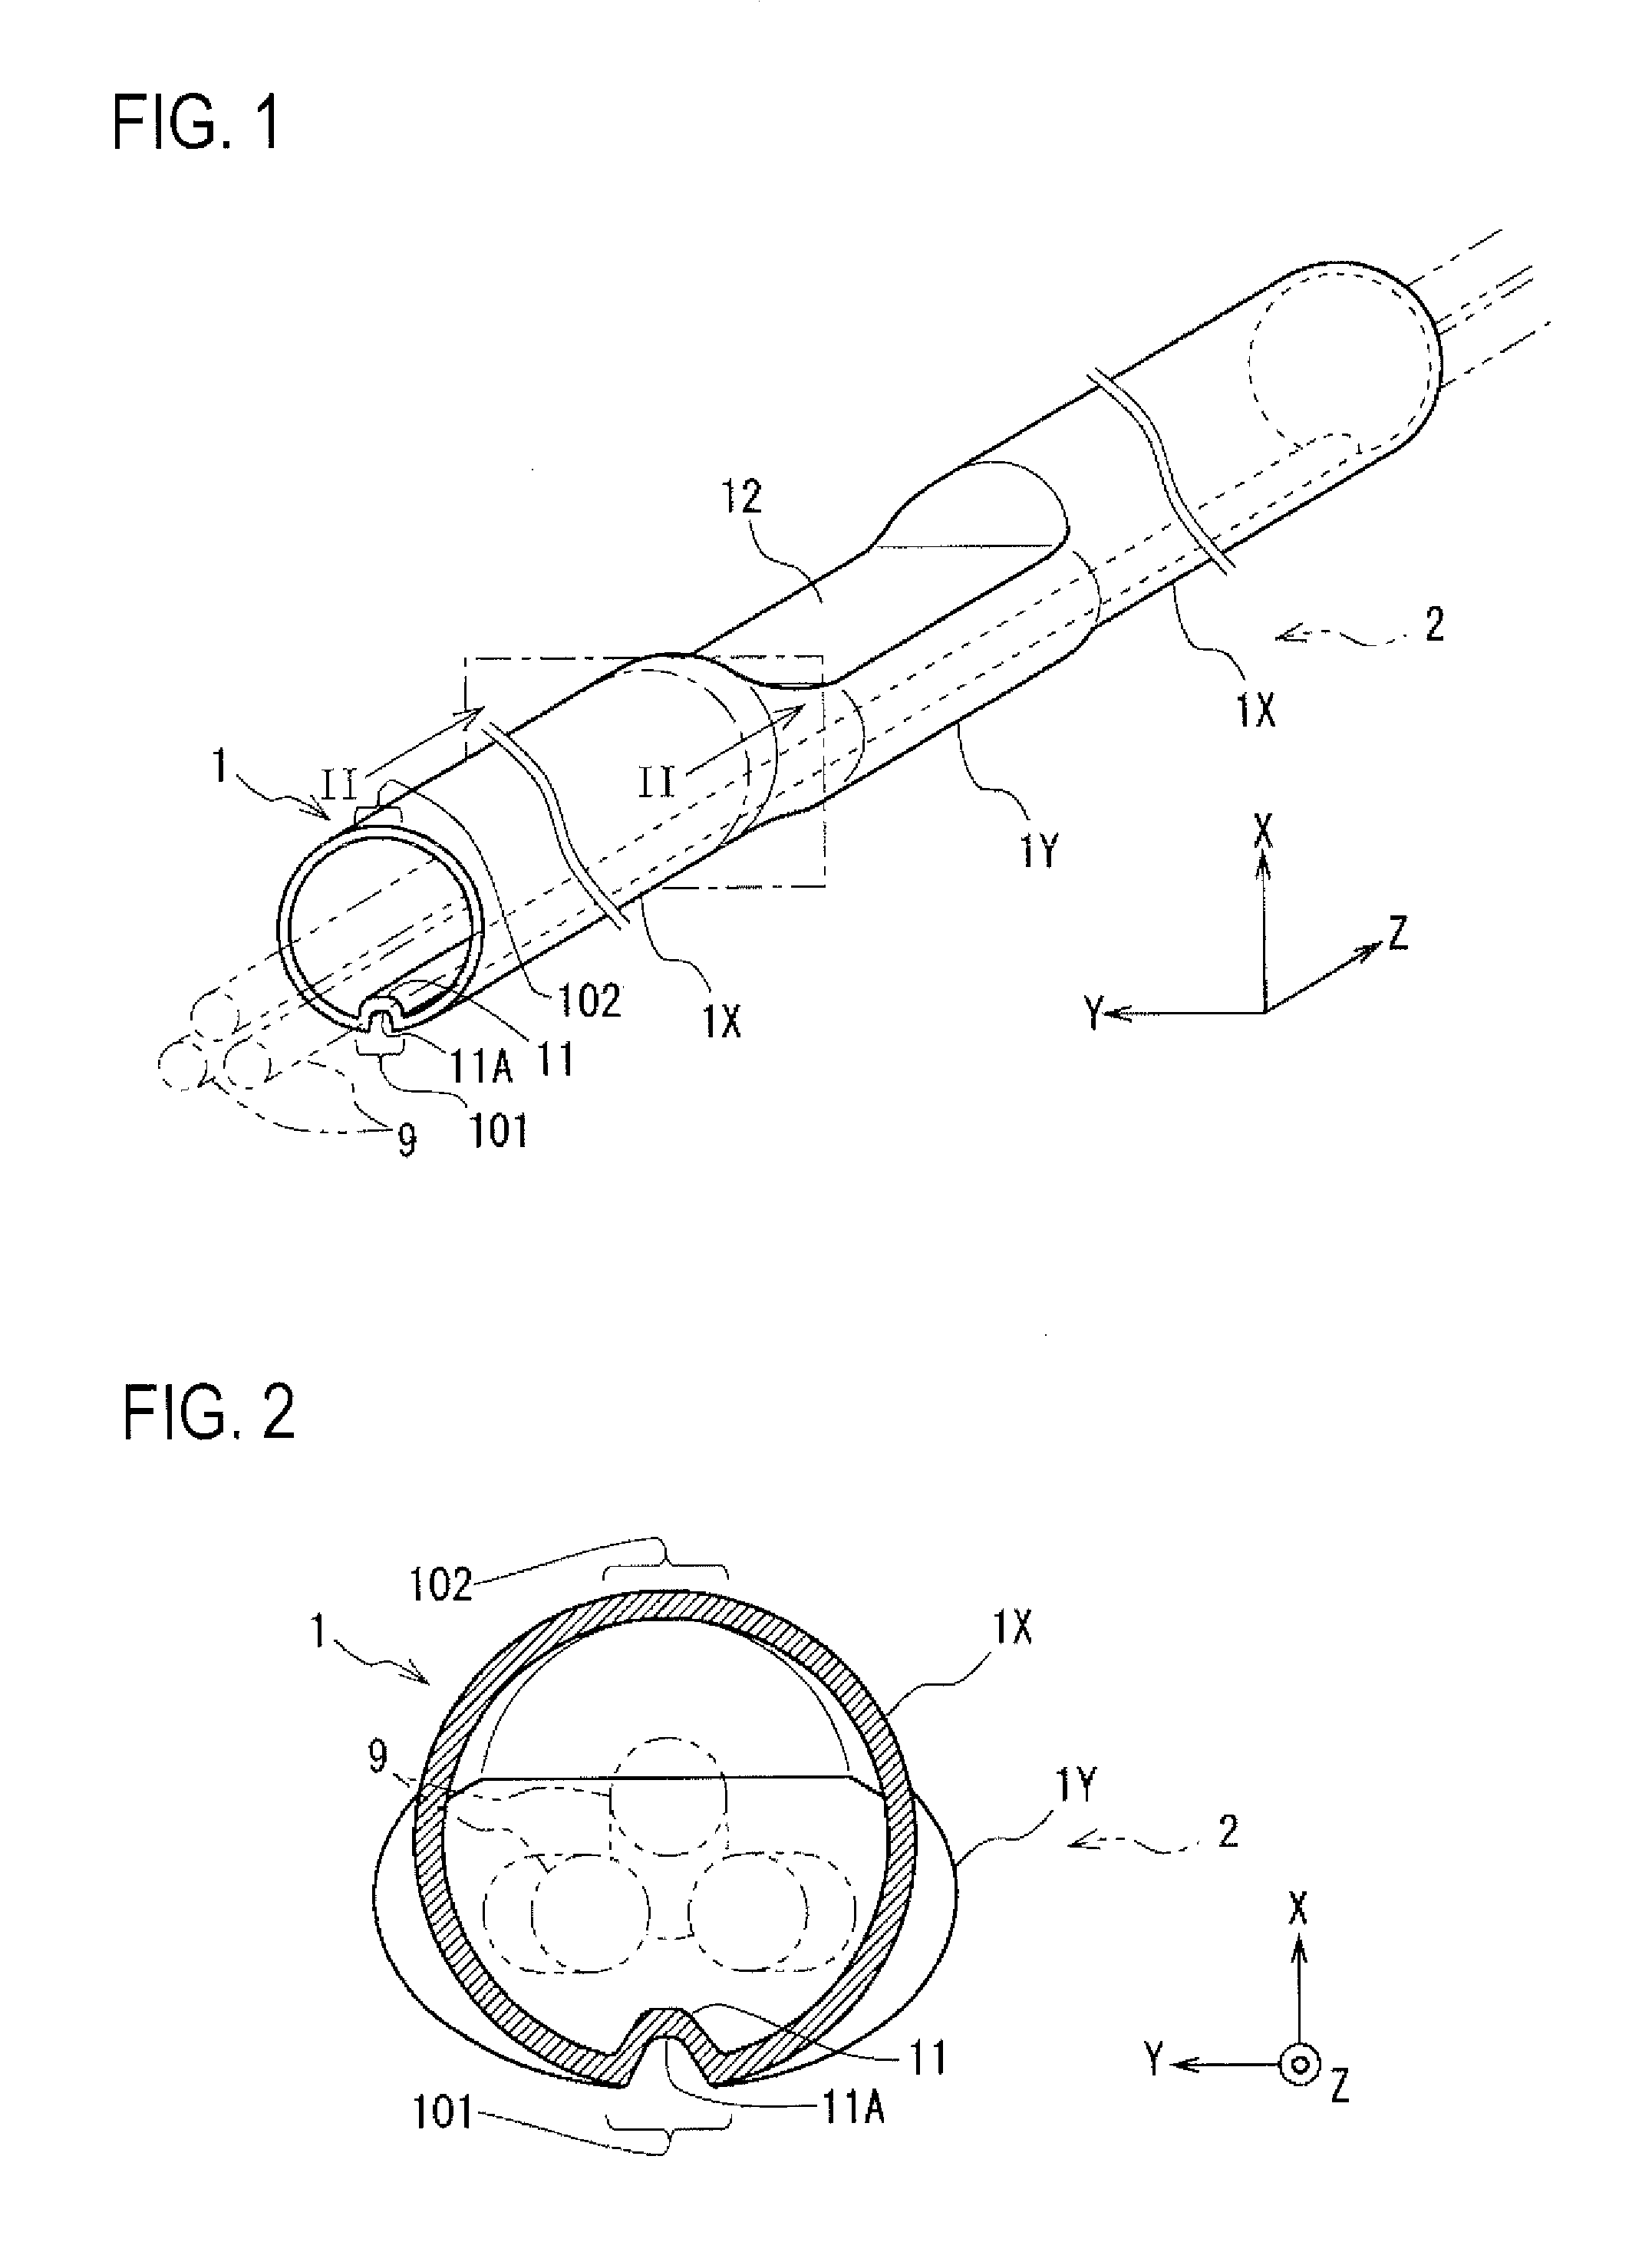 Electric-wire protecting pipe and wire harness